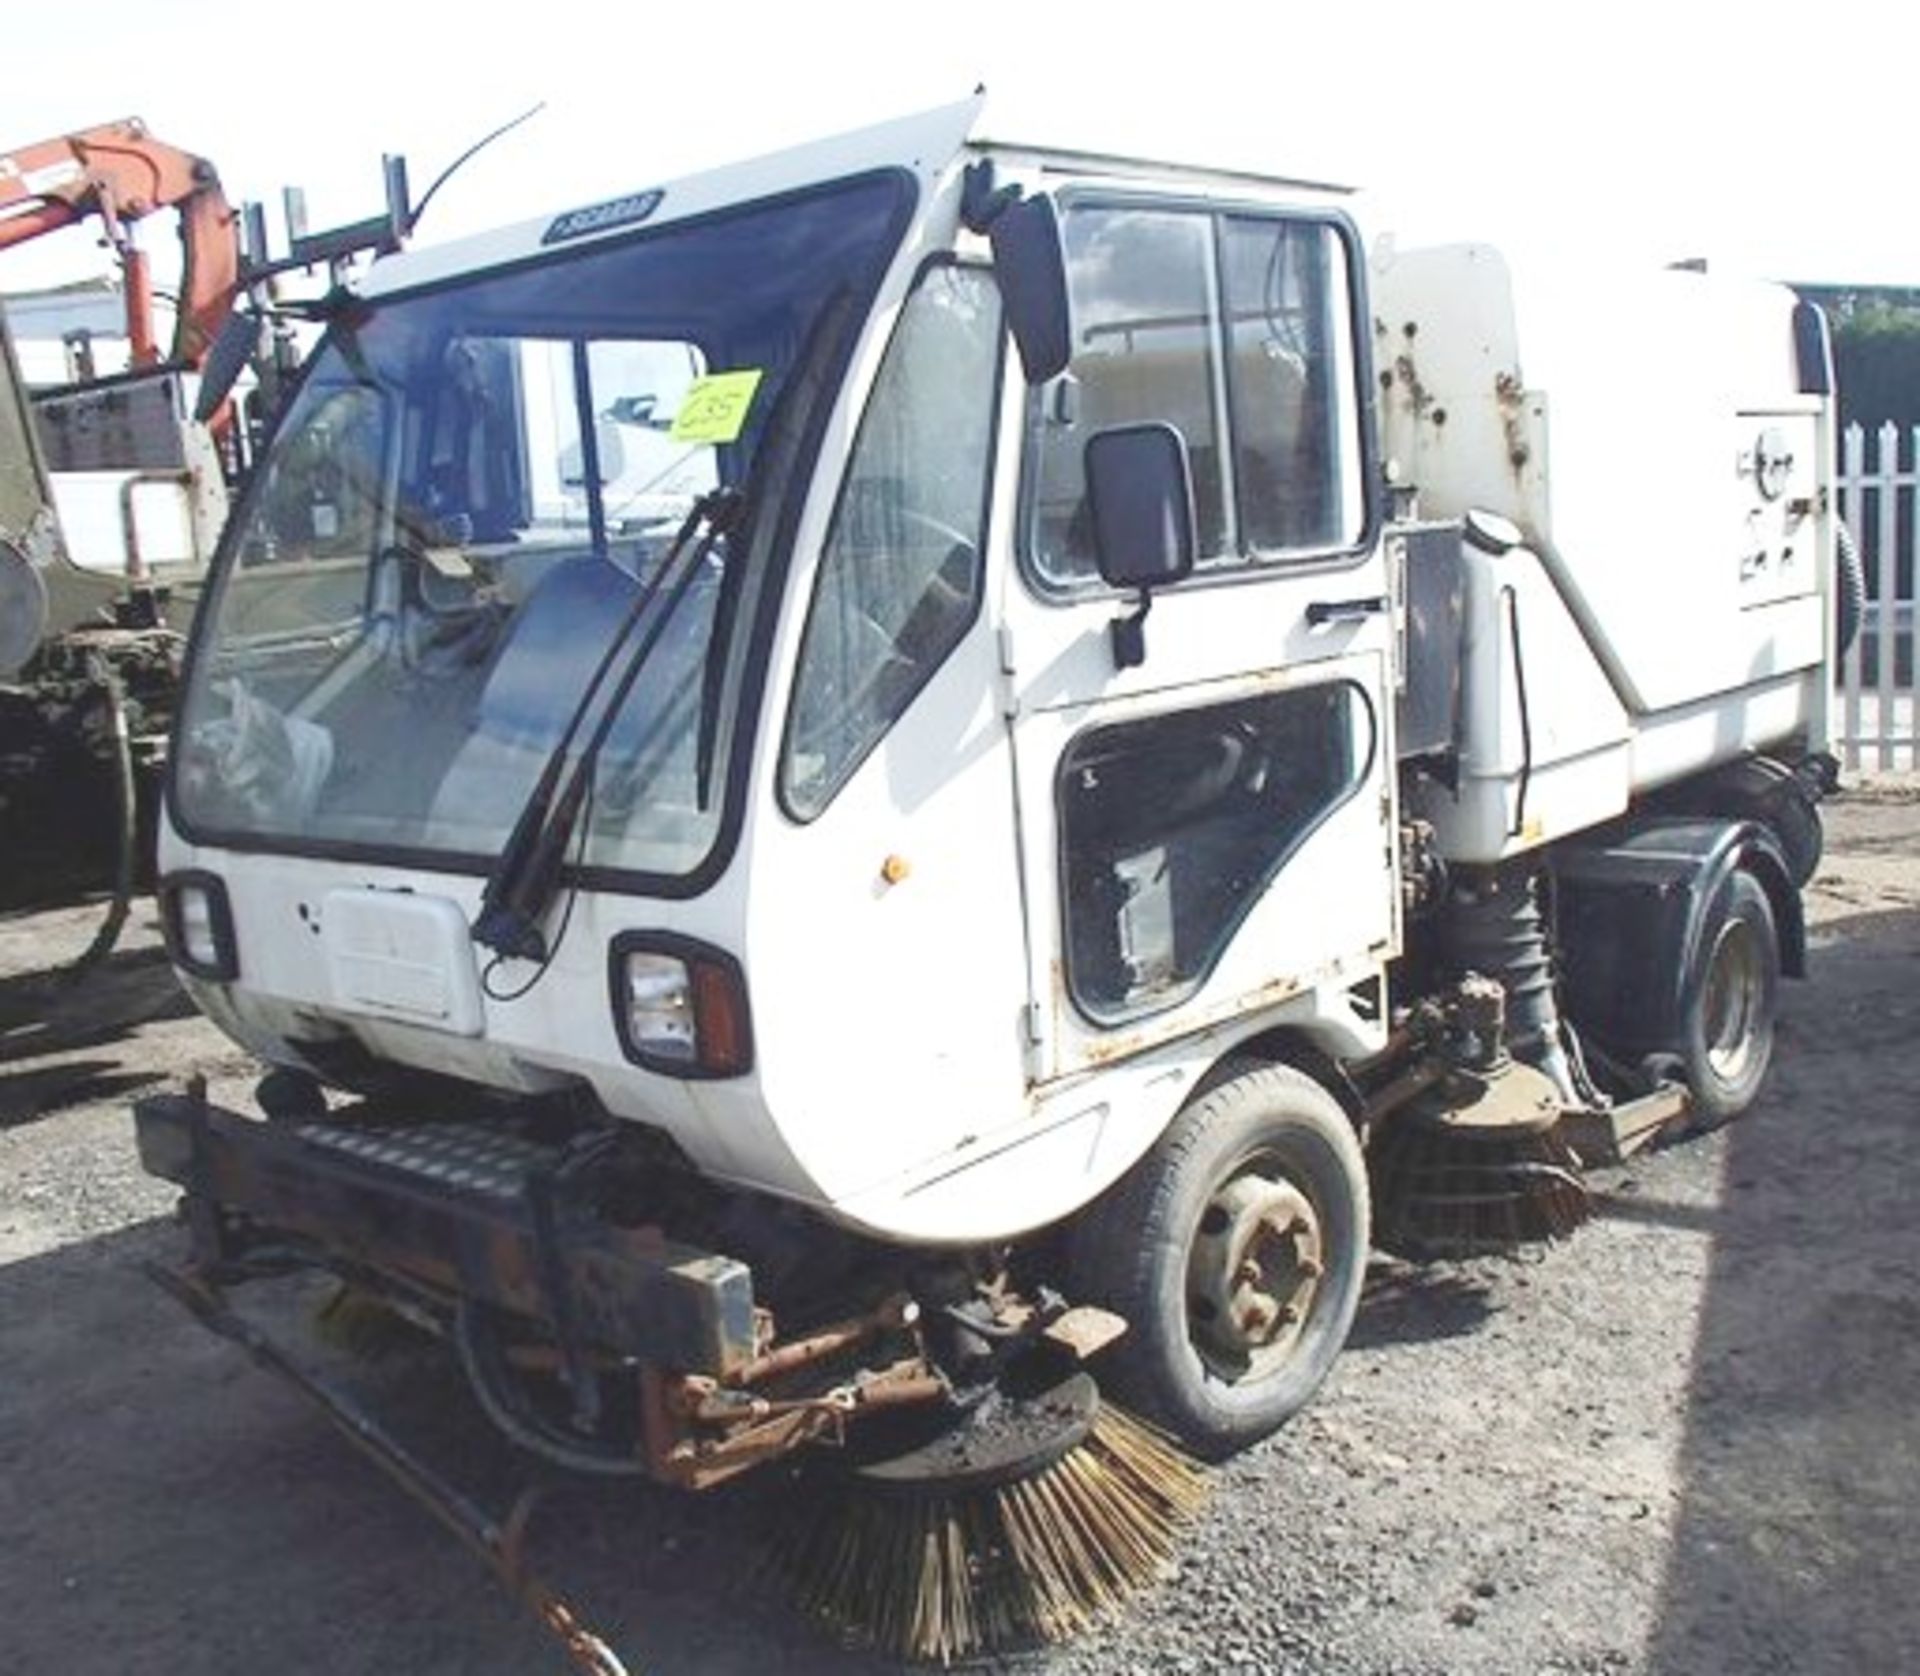 SCARAB 3.5 - 2776cc
Body: 2 Dr Truck
Color: White
First Reg: 01/06/2001
Doors: 2
MOT: 
Mileage: